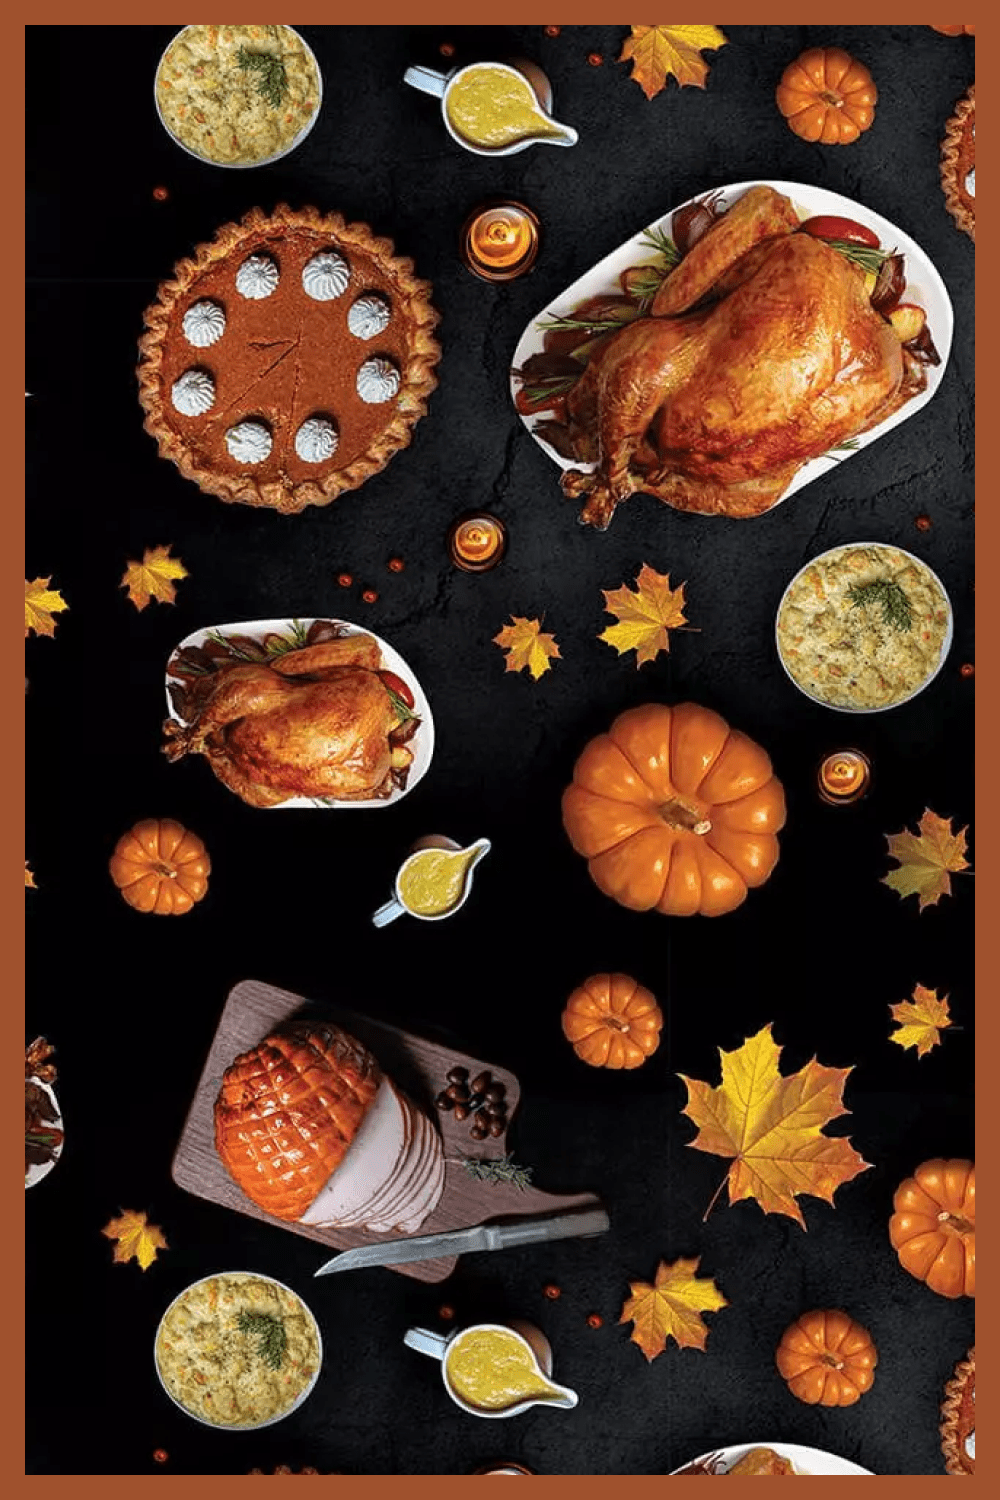 Turkey on a platter, pumpkins, yellow leaves, pies on a black background.